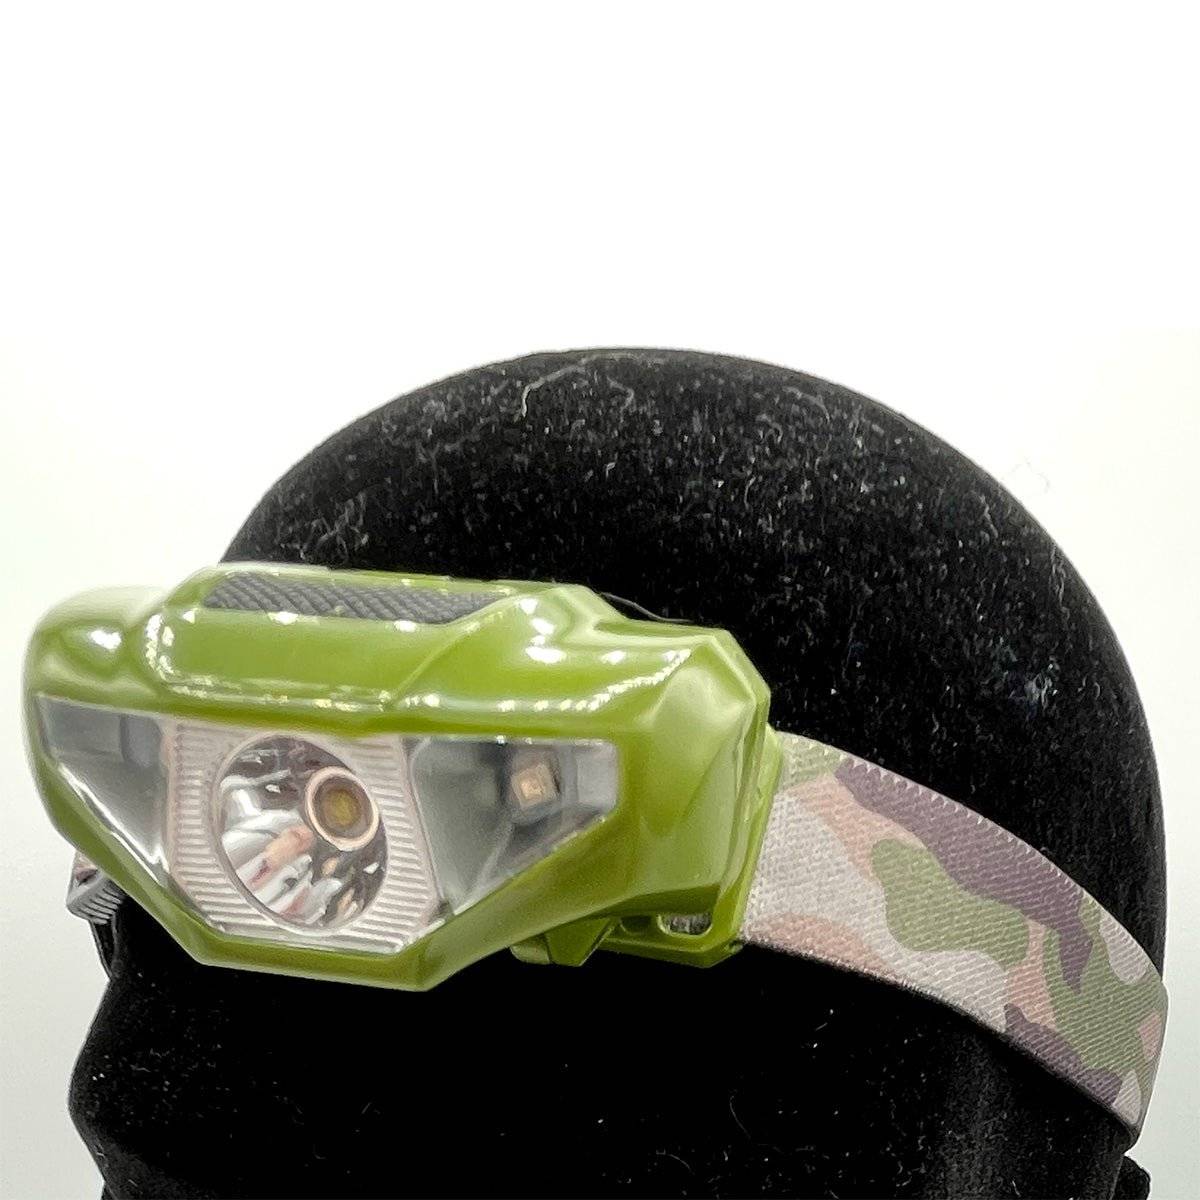 Silverpoint Infantry Head Torch with Red/Light Light - John Bull Clothing